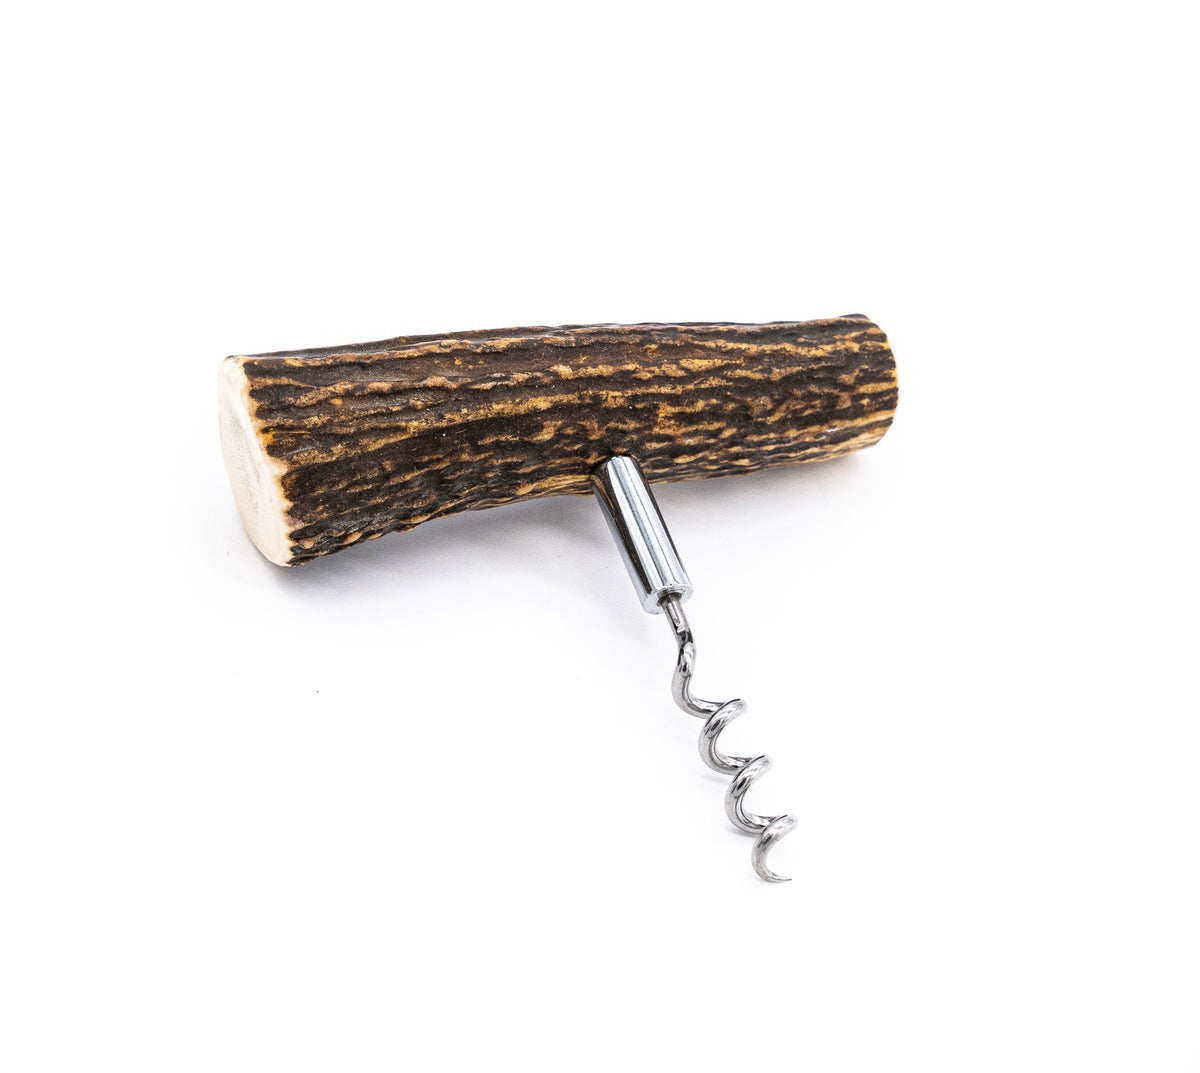 Antler Handle Corkscrew Wine Bottle Opener | Rustic Décor Country Home Farmhouse Hunting Lodge Bar Hunter Gift Man Cave Cabin